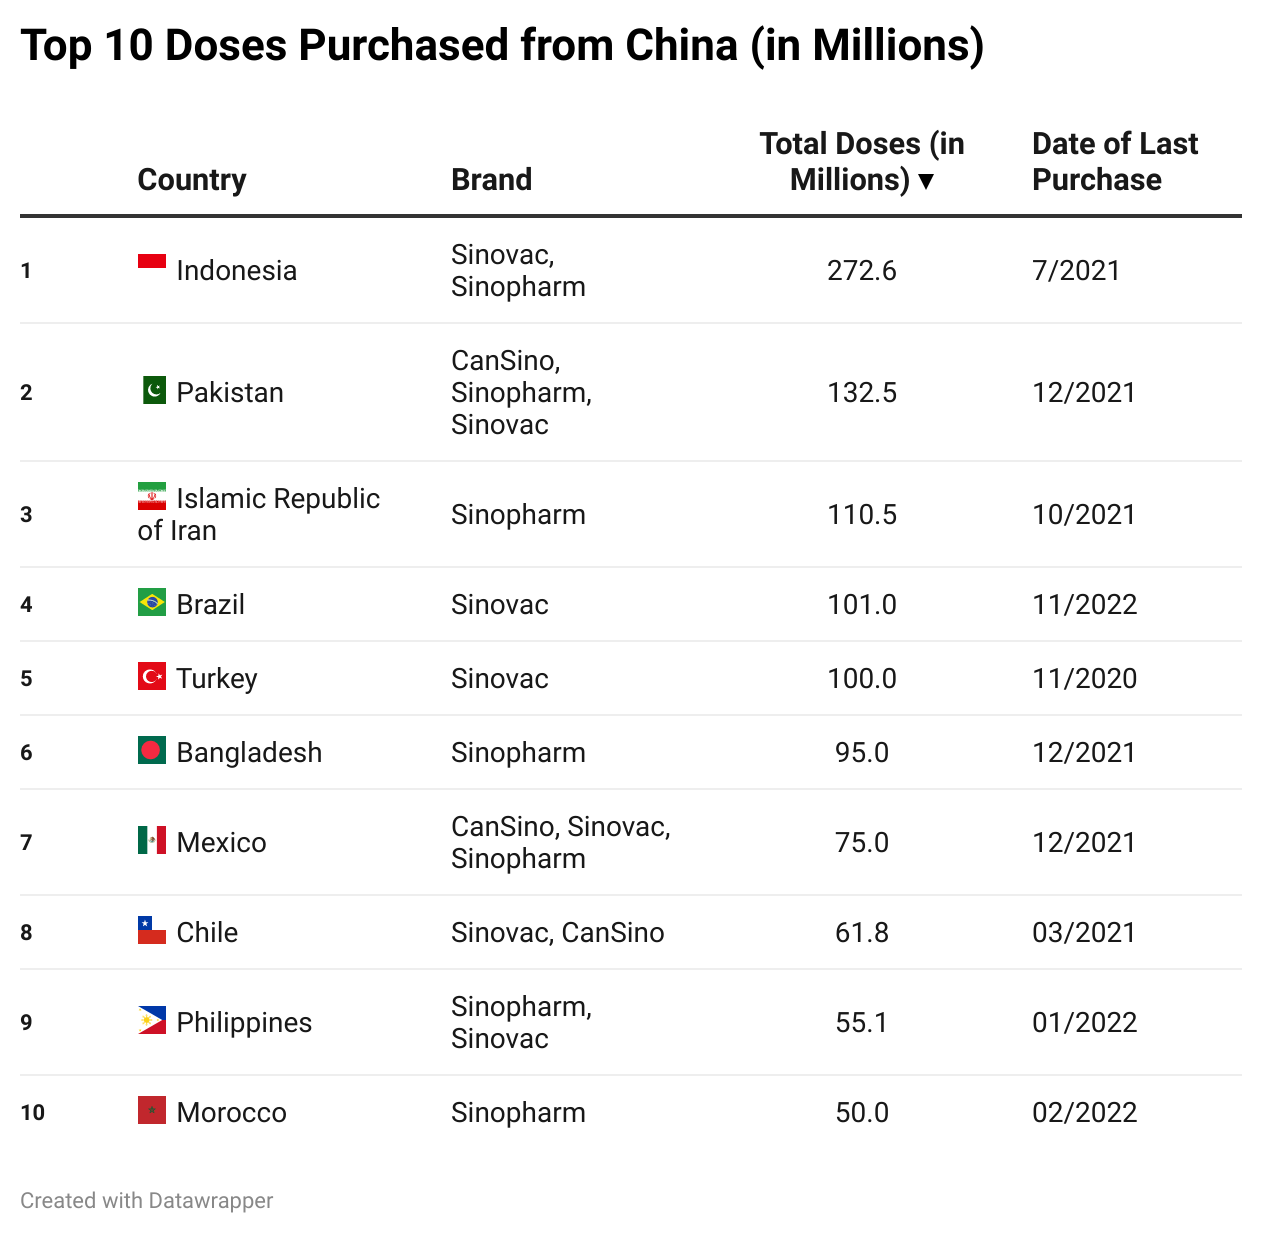 KwEh6-top-10-doses-purchased-from-china-in-millions-nbsp-